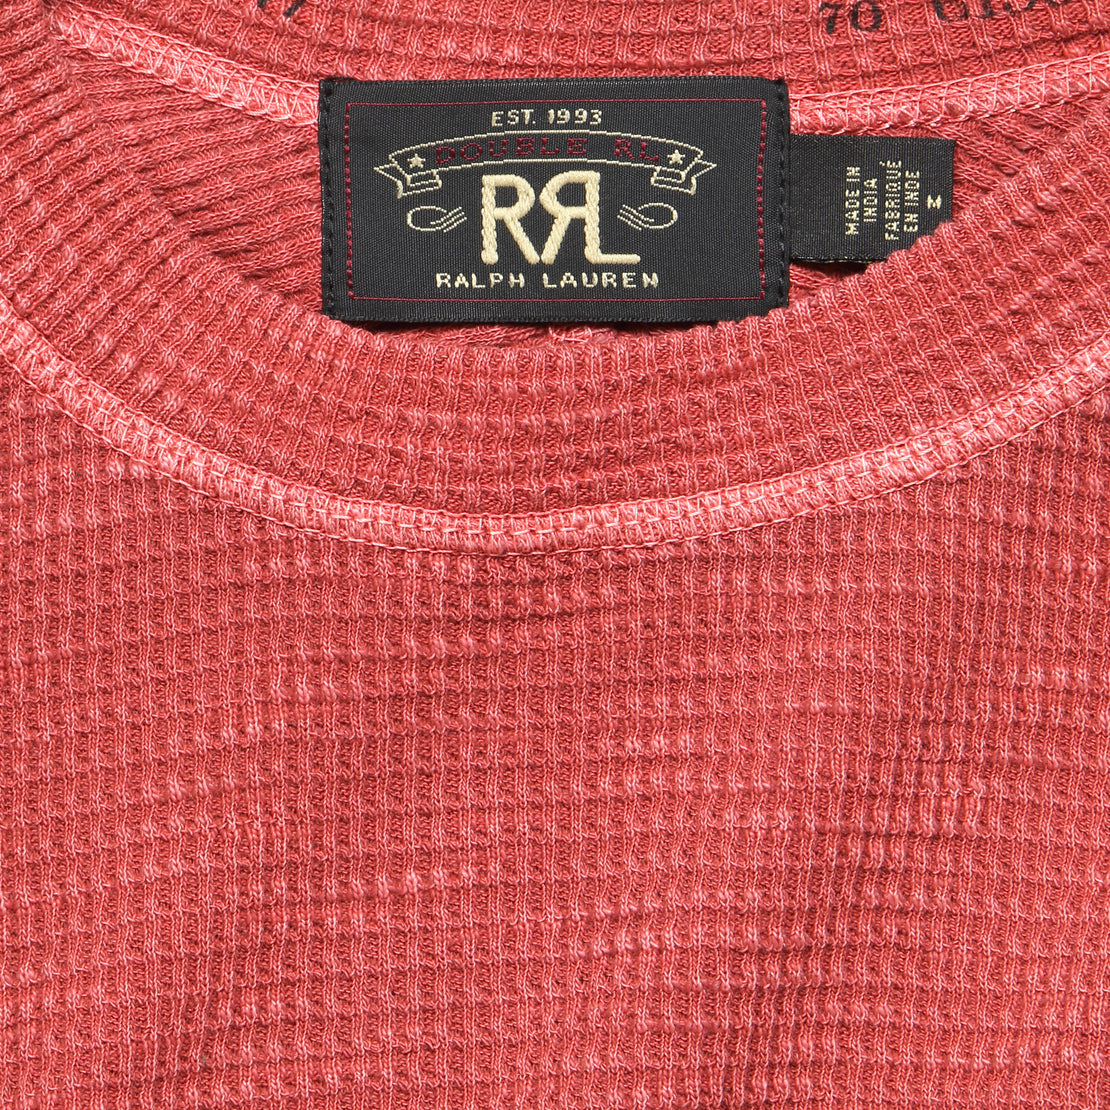 Waffle Crewneck - Red - RRL - STAG Provisions - Tops - L/S Knit